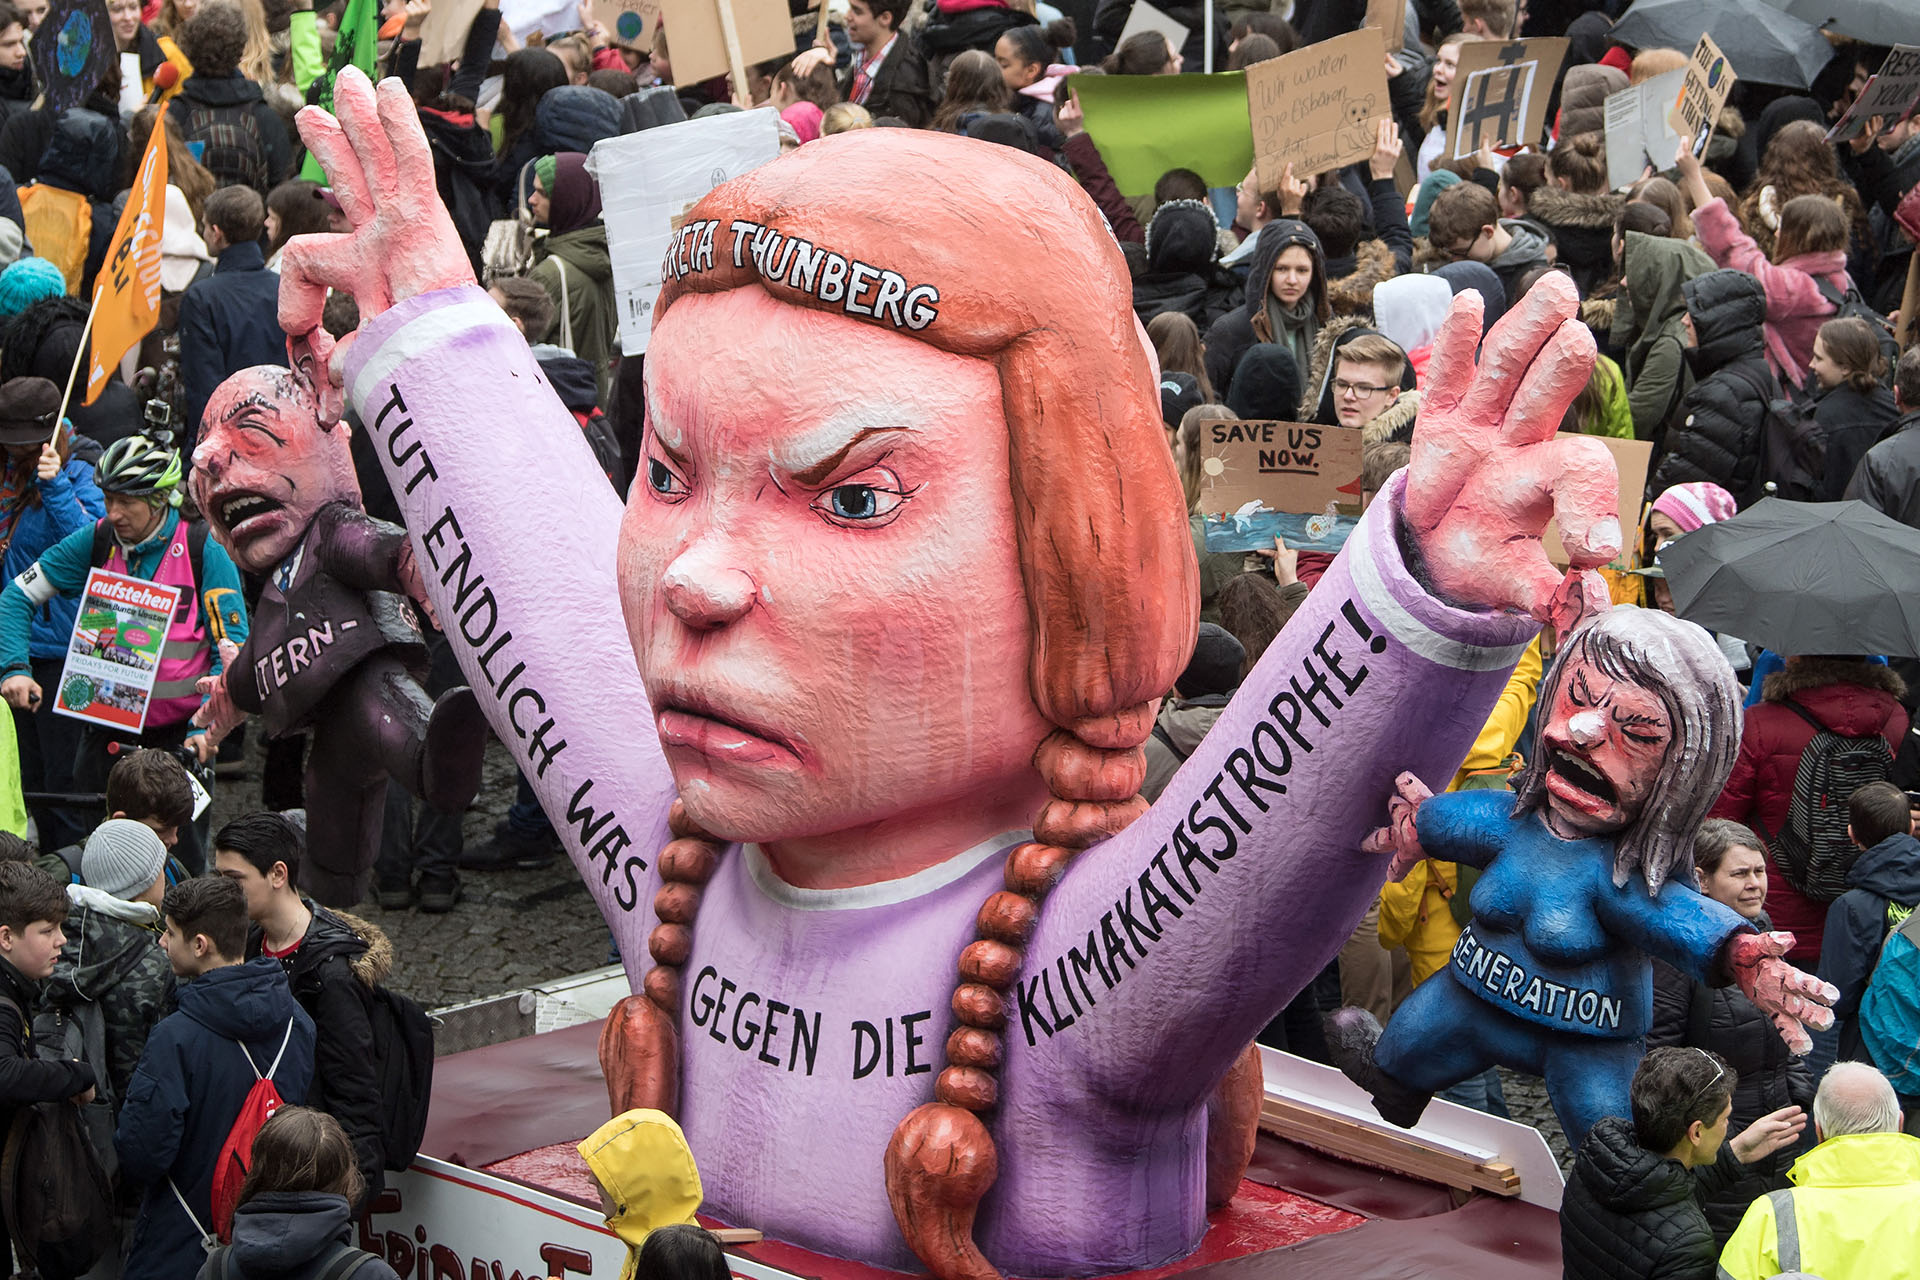 Youths demonstrate with banners and placards and a figure depicting young Swedish climate activist Greta Thunberg holding two representatives of her parents' generation and reading "Do something against the climate disaster!" during the "Fridays For Future" movement on a global day of student protests aiming to spark world leaders into action on climate change on March 15, 2019 in Duesseldorf, western Germany. - The worldwide protests were inspired by Swedish teen activist Greta Thunberg, who camped out in front of parliament in Stockholm last year to demand action from world leaders on global warming. (Photo by Federico Gambarini / dpa / AFP) / Germany OUT